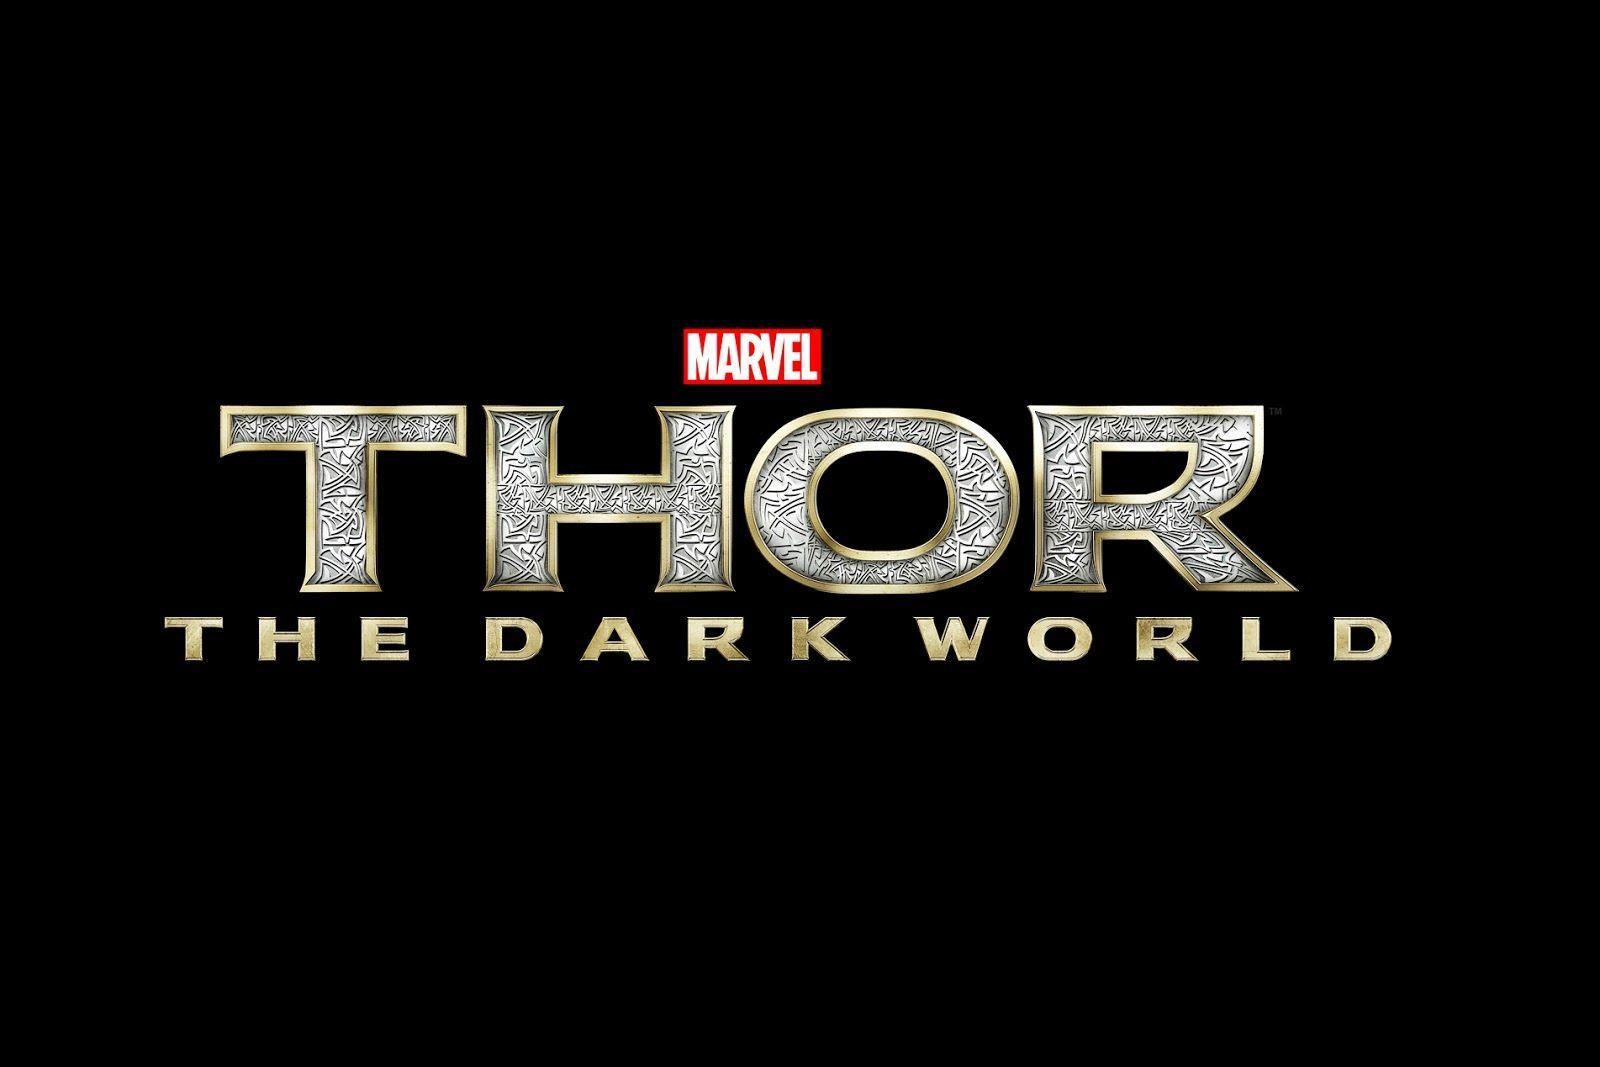 Thor The Dark World 2013 HD Wallpaper and Movie Poster Download